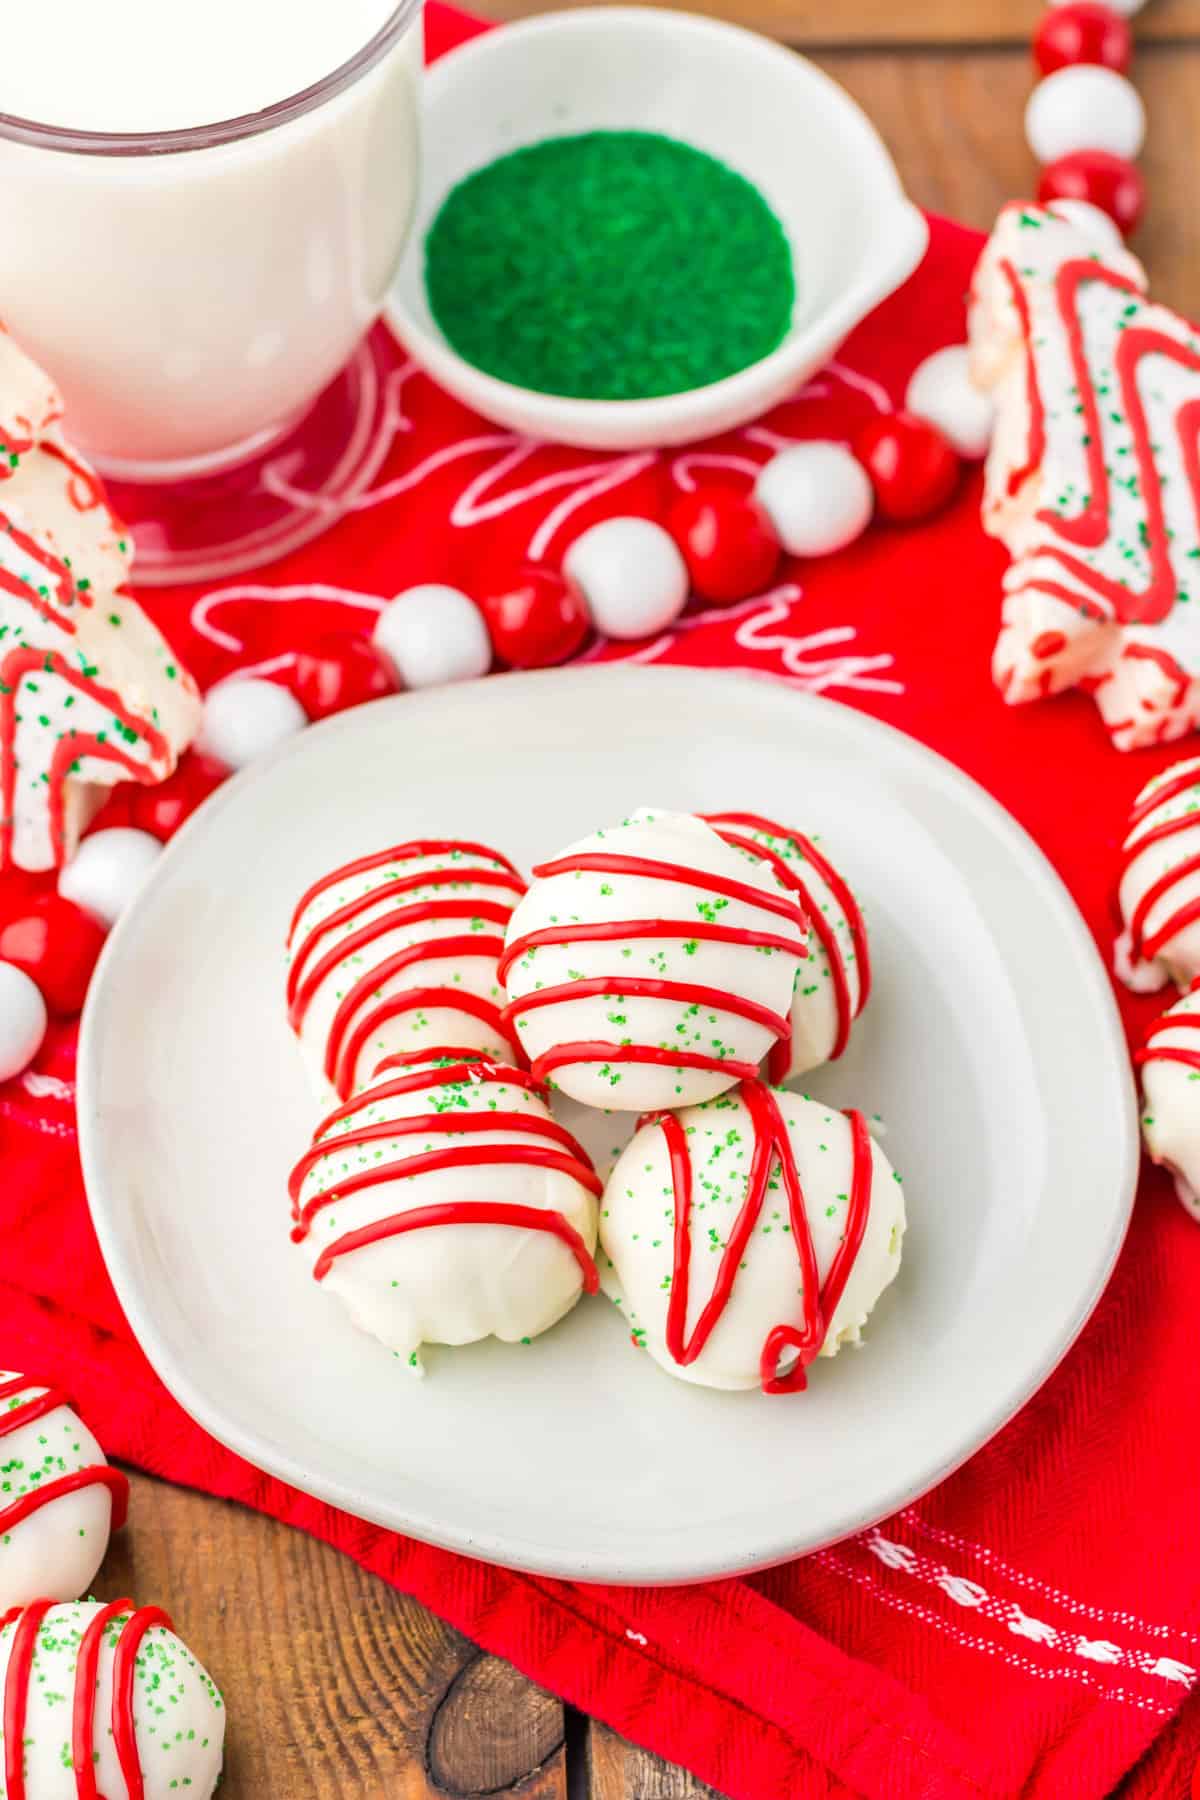 Little Debbie Christmas Tree Cake Balls on a white plate with a glass of milk, green sugar sprinkles, and Little Debbie Christmas Tree Snack Cakes in the background.